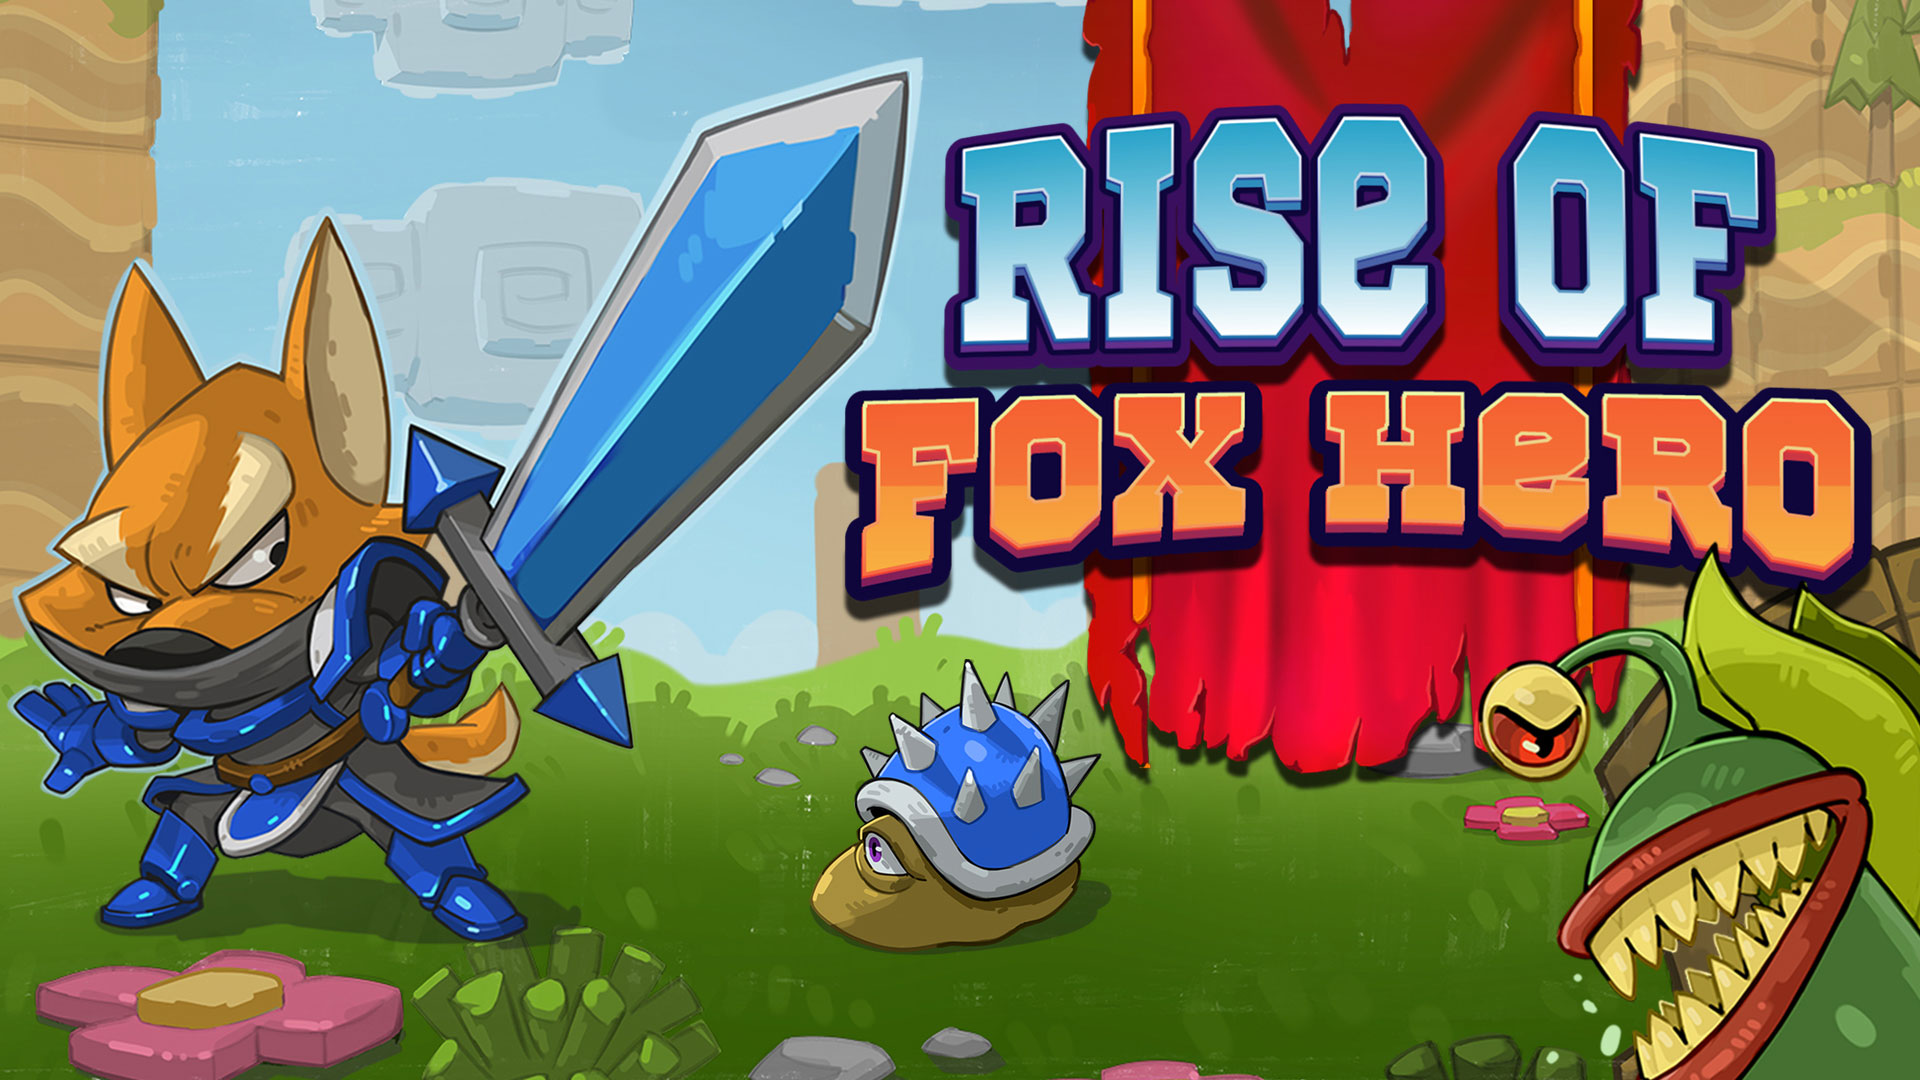 A Fox, a Sword and a Shield: the Only Ingredients you Need to Become a Hero